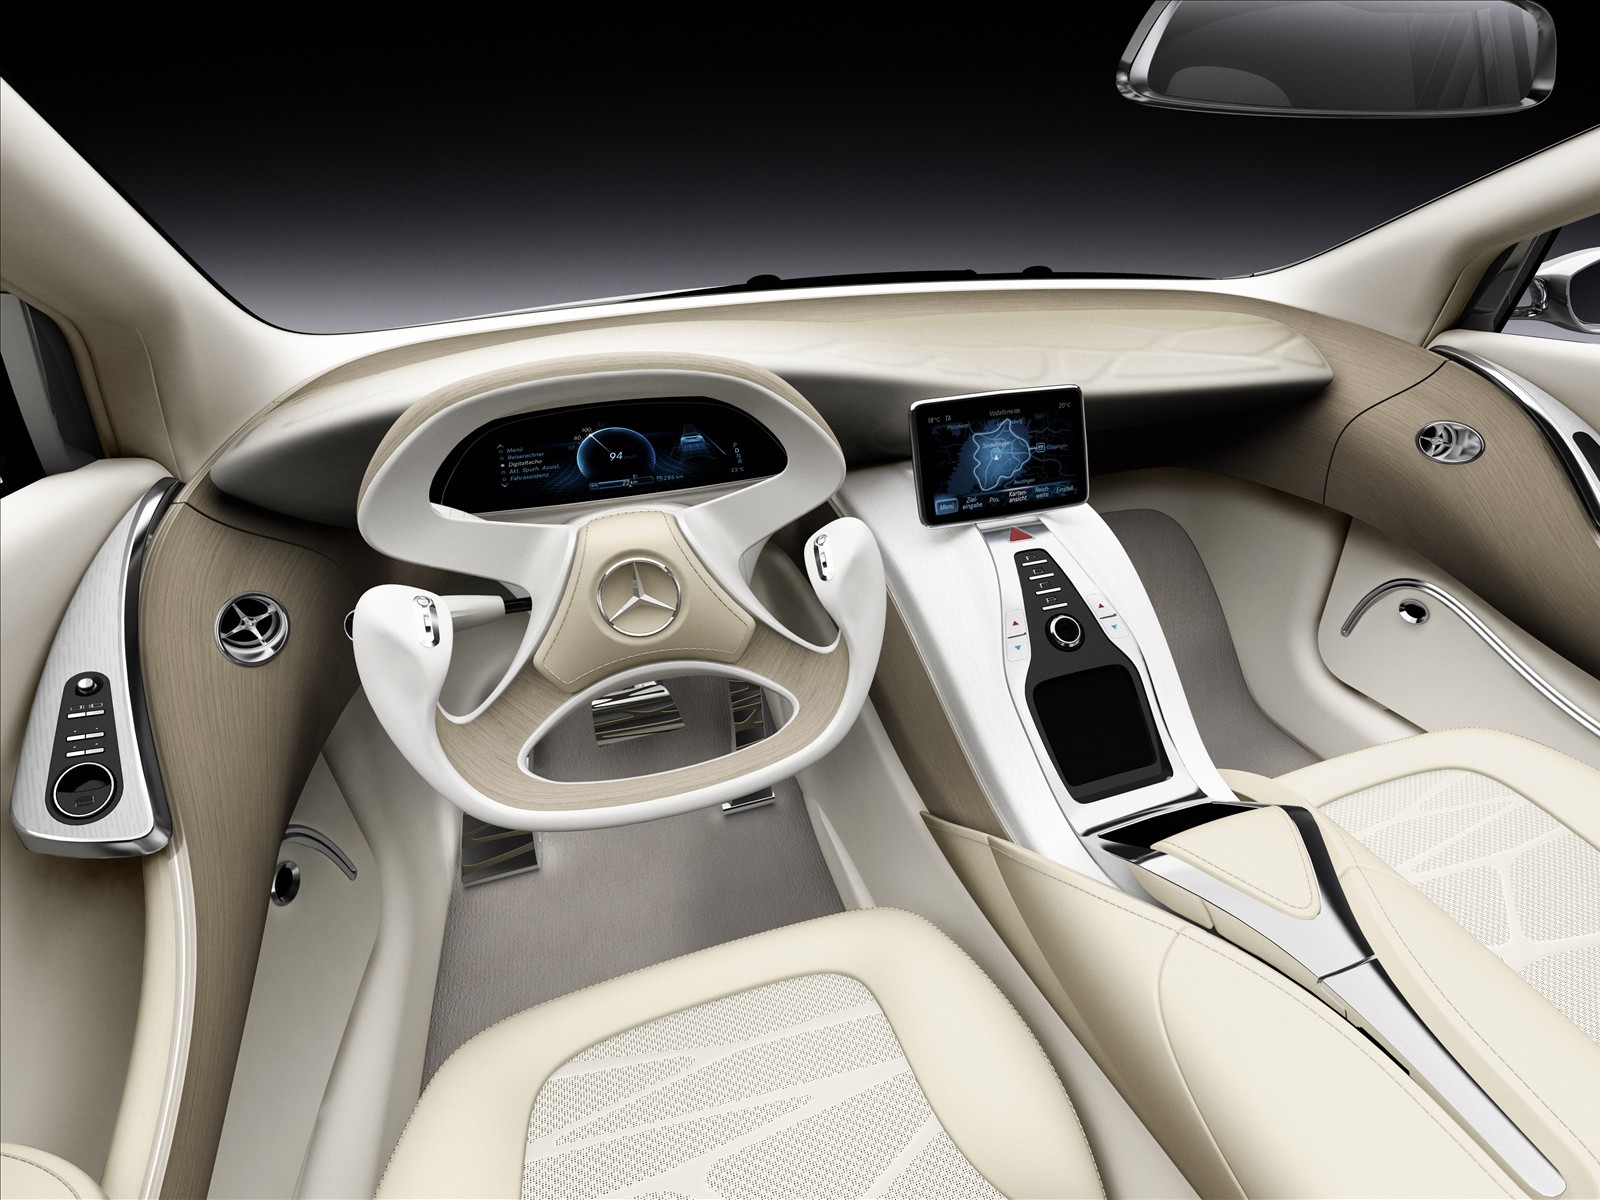 Mercedes Benz÷˹۸ F800 Style Concept 2010(ֽ20)